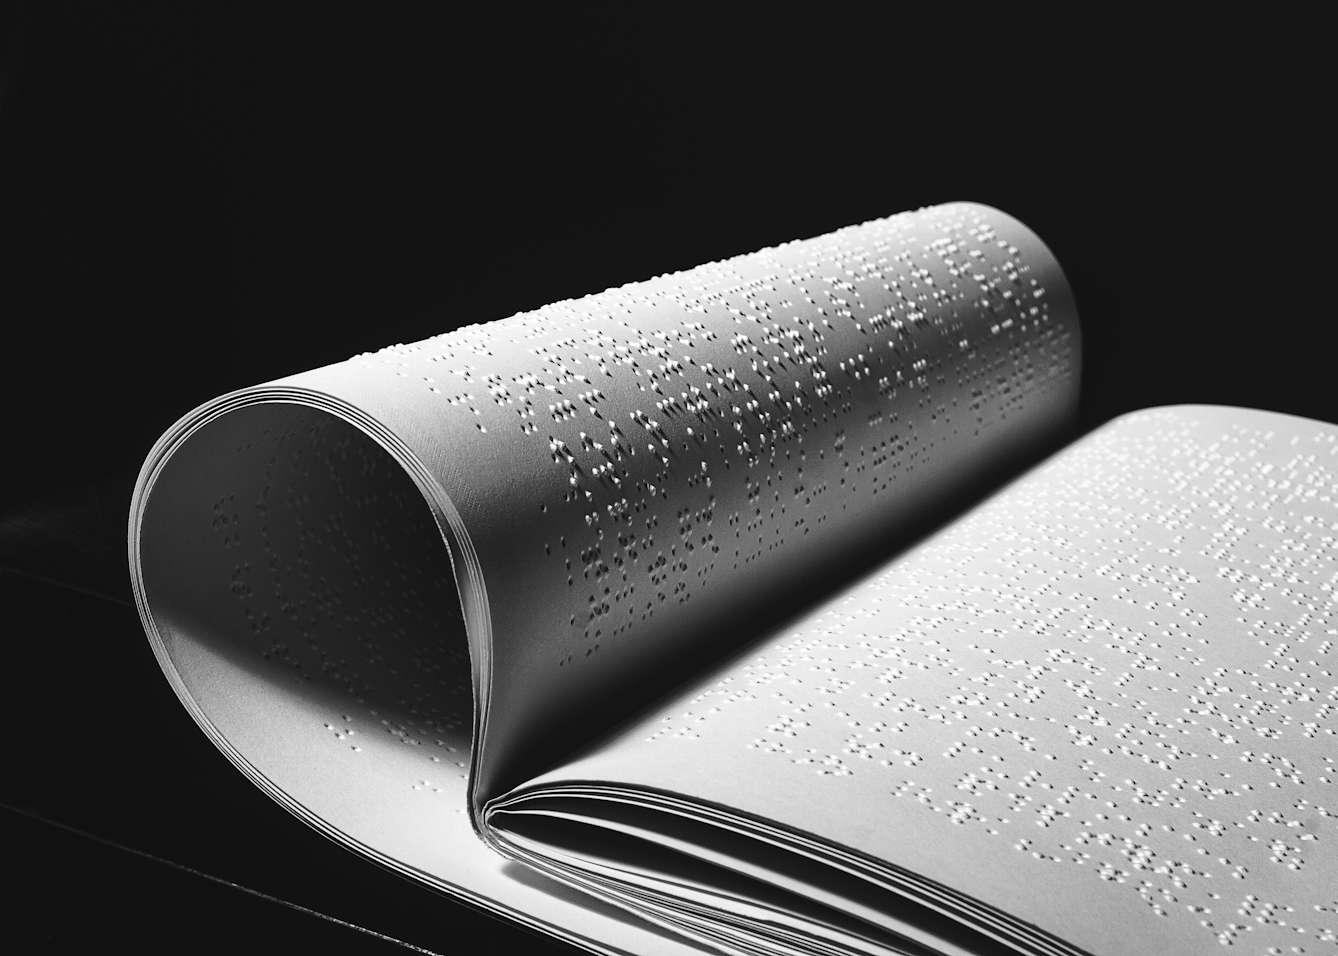 Black and white photograph of a Braille book, printed onto white sheets of paper. The sheets are bound into a book form with one half of the book curled around and tuck under the other. The sheets are lit with hard direct light which reveals the texture and form of the Braille. The background surrounding the book is plunged into darkness.